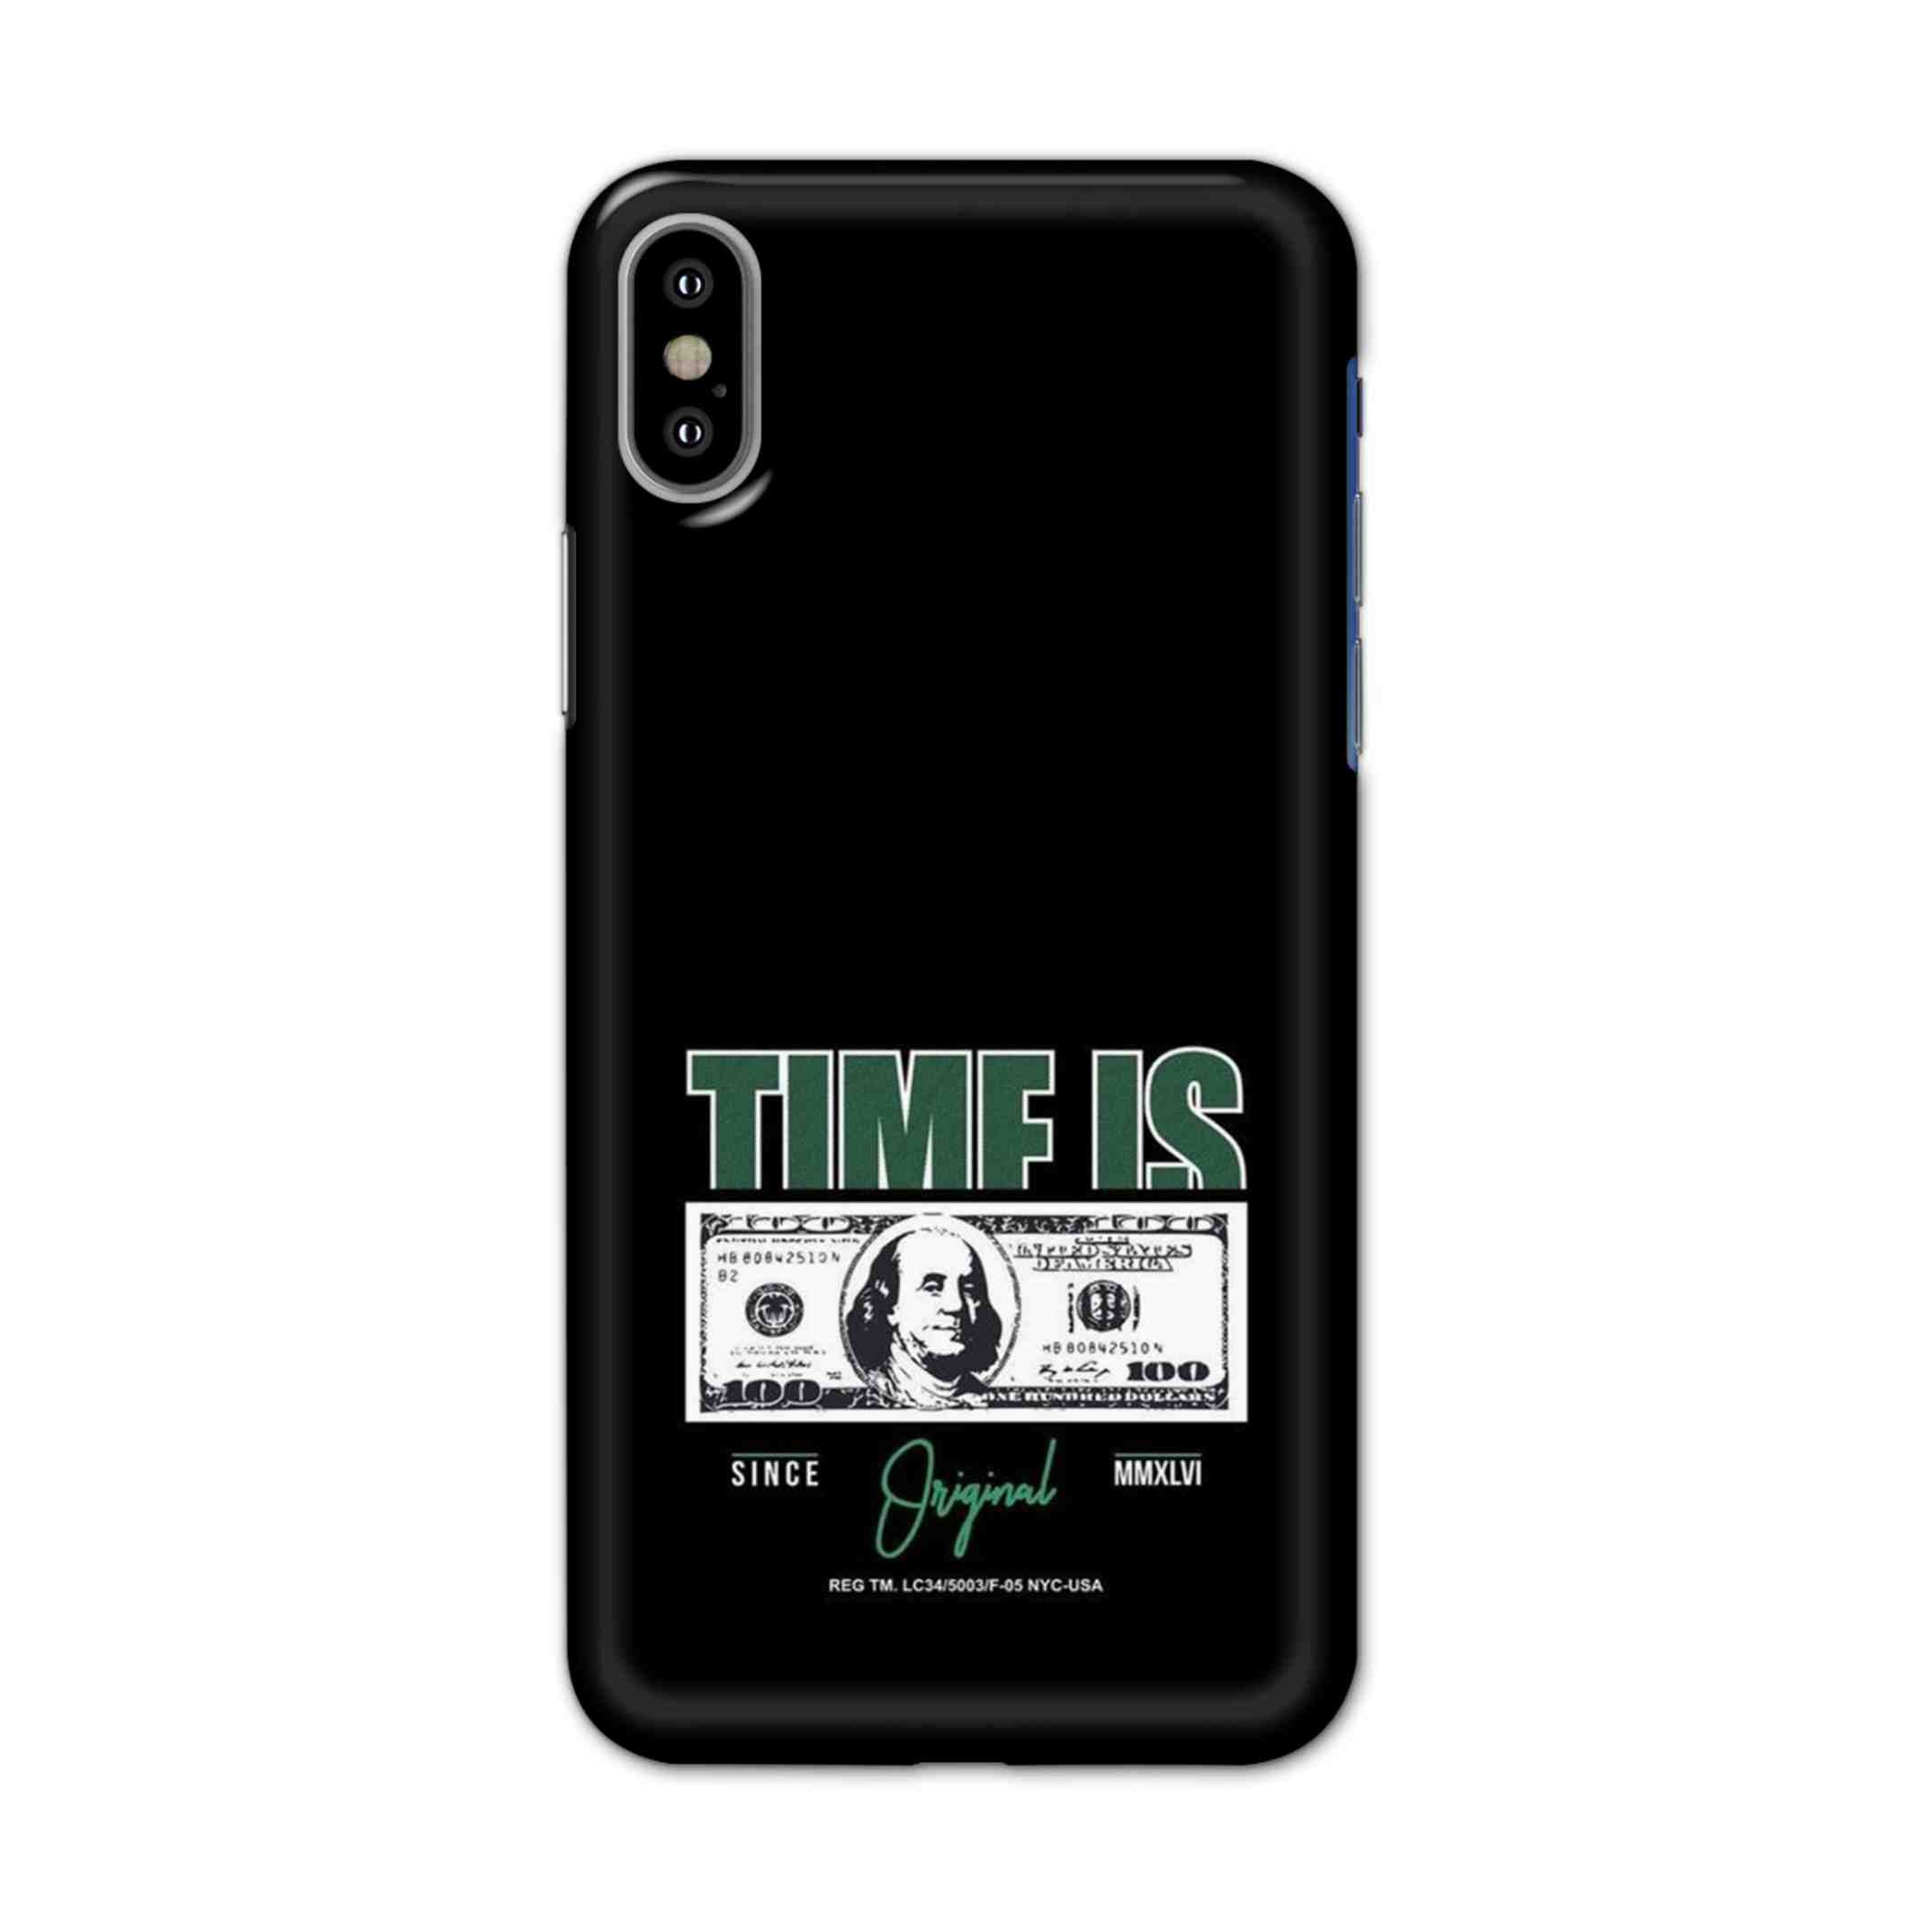 Buy Time Is Money Hard Back Mobile Phone Case/Cover For iPhone X Online